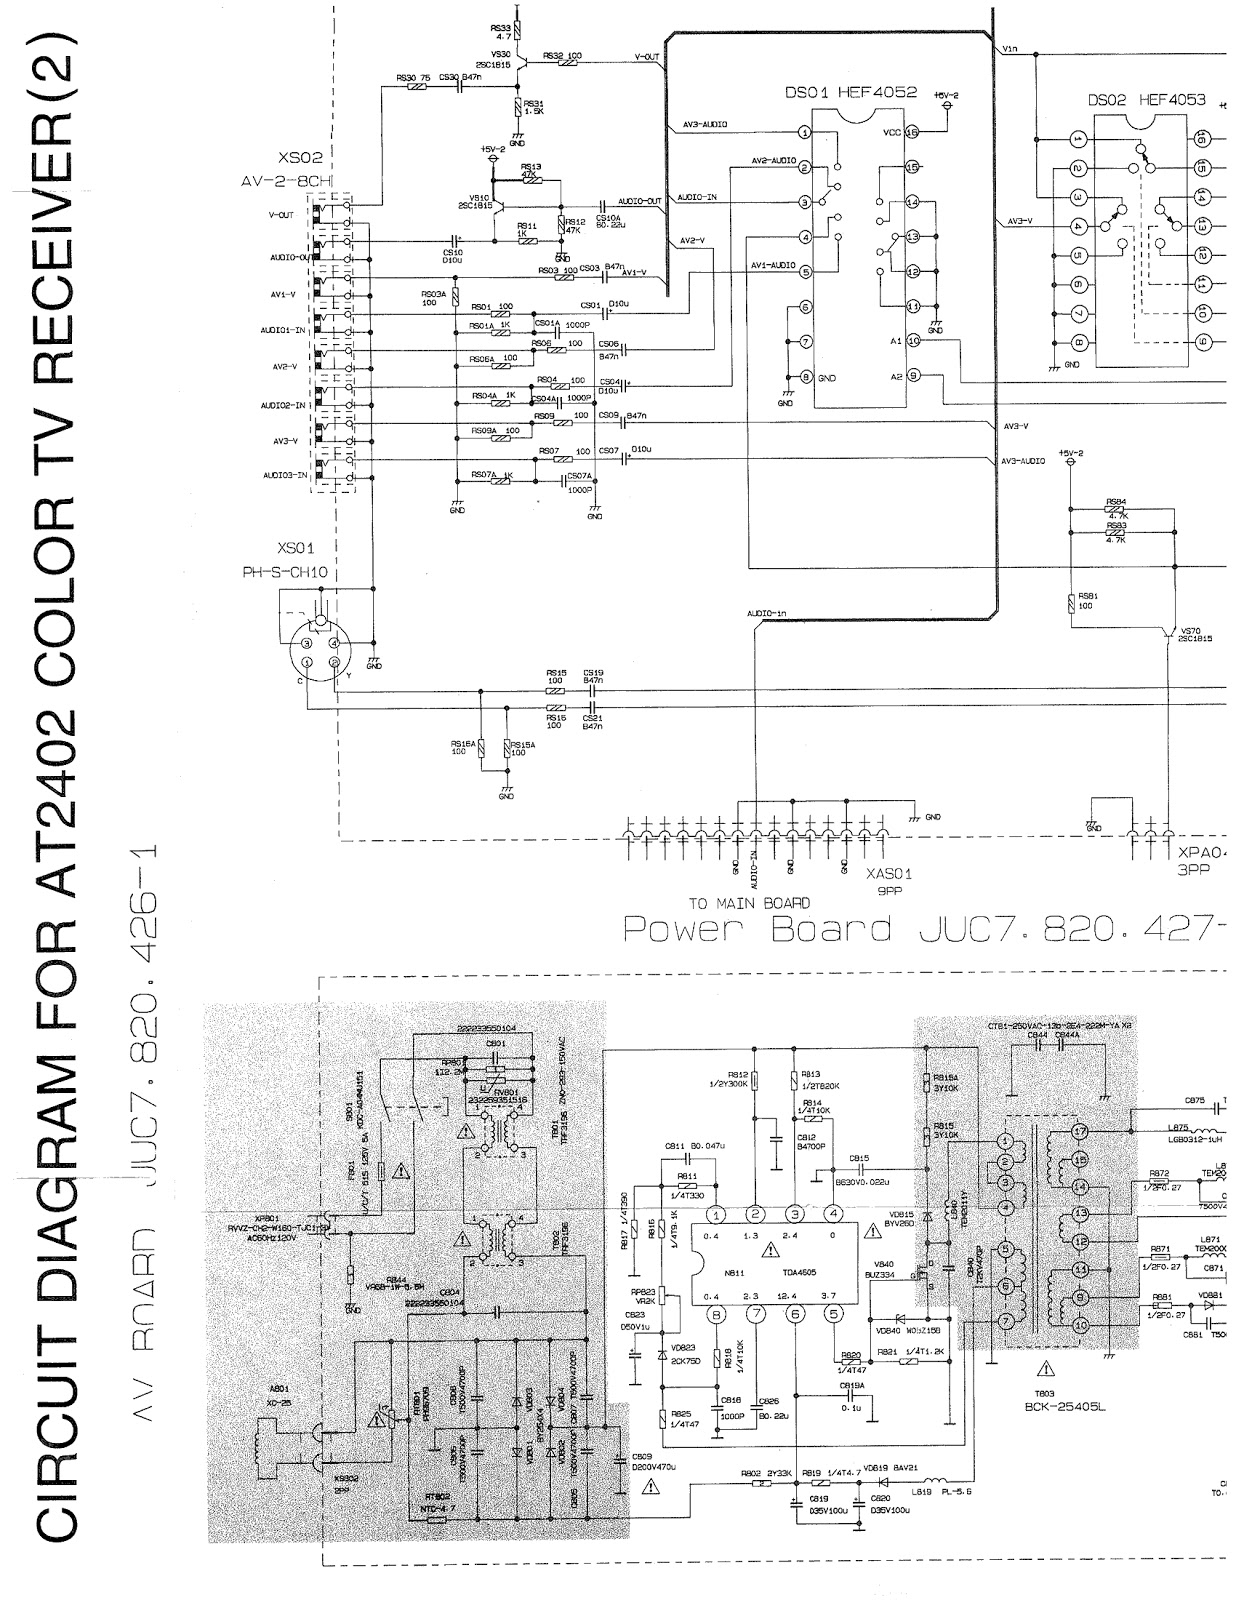 Philips-tv-circuit-diagram Images - Frompo